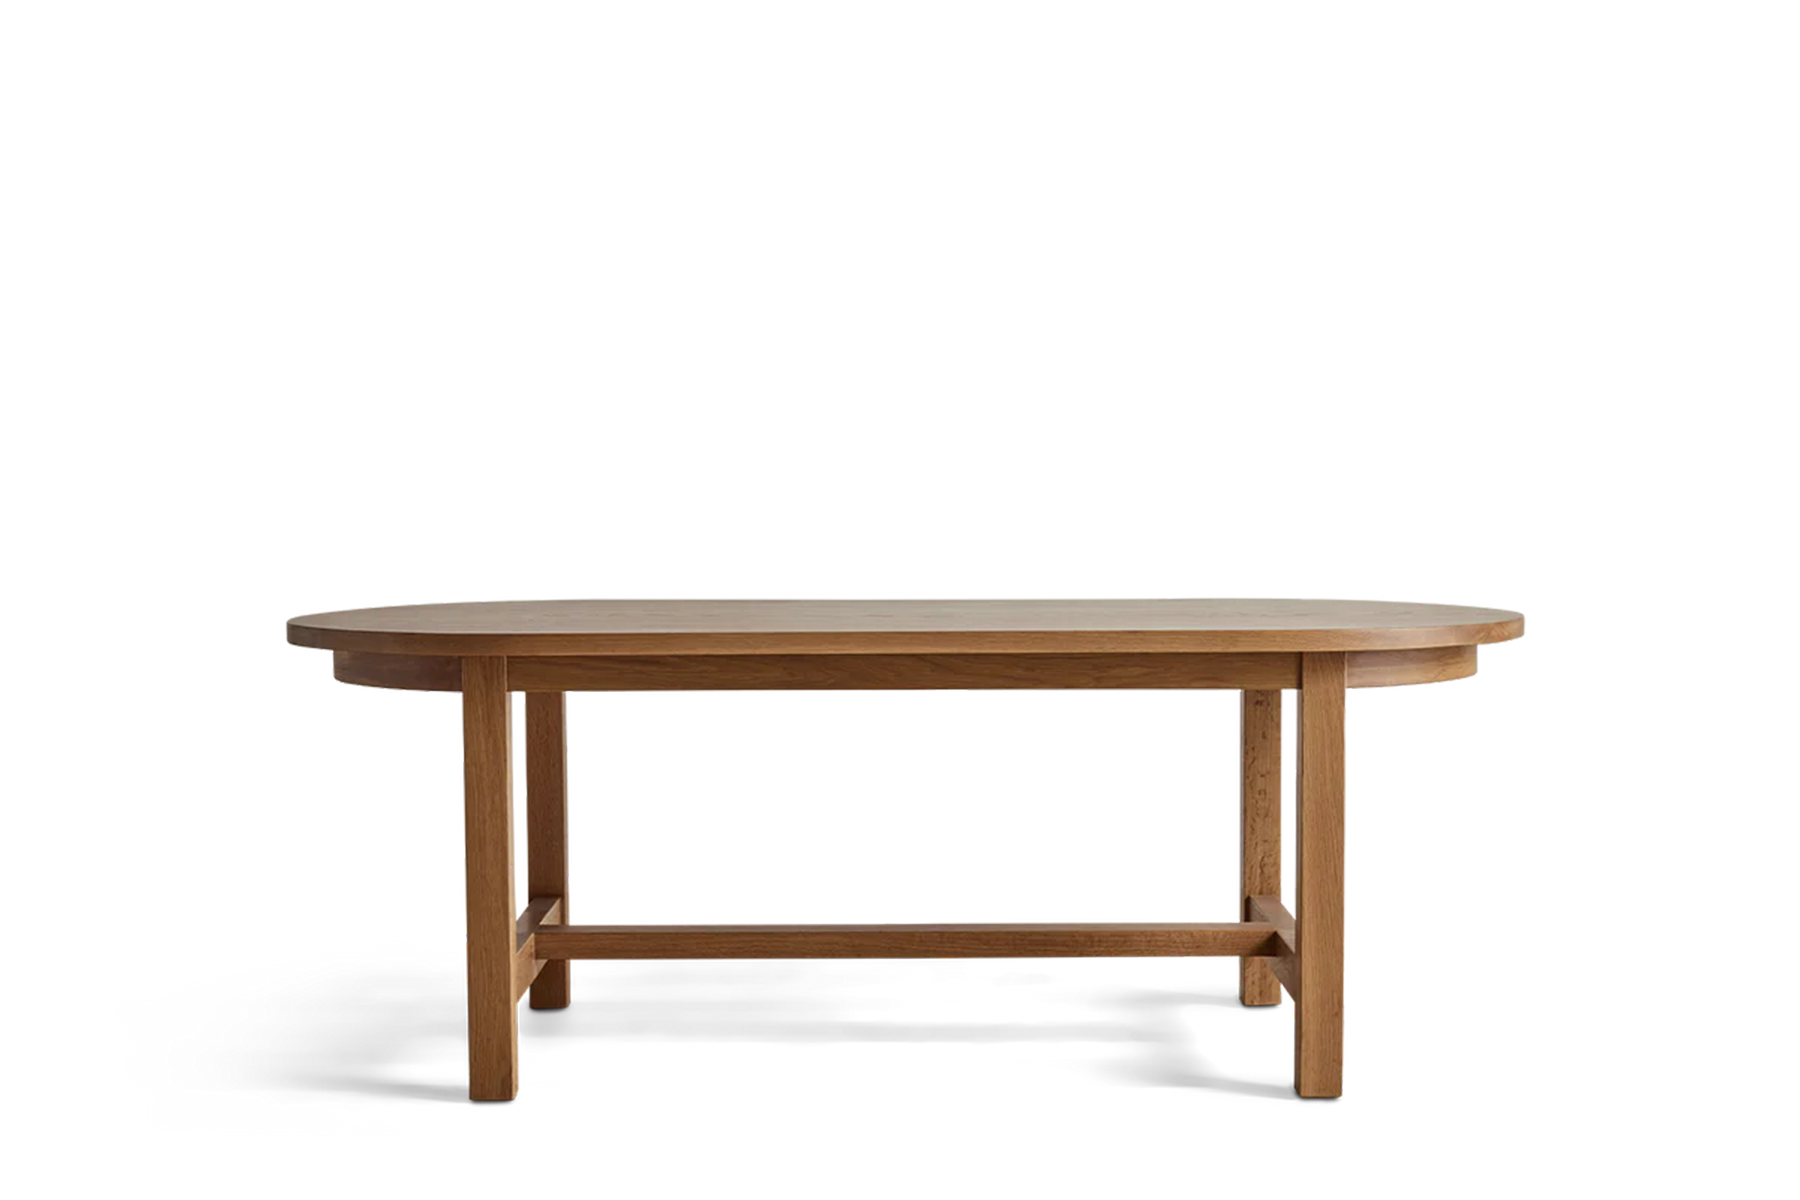 Nickey Kehoe Harvest Dining Table, Oval